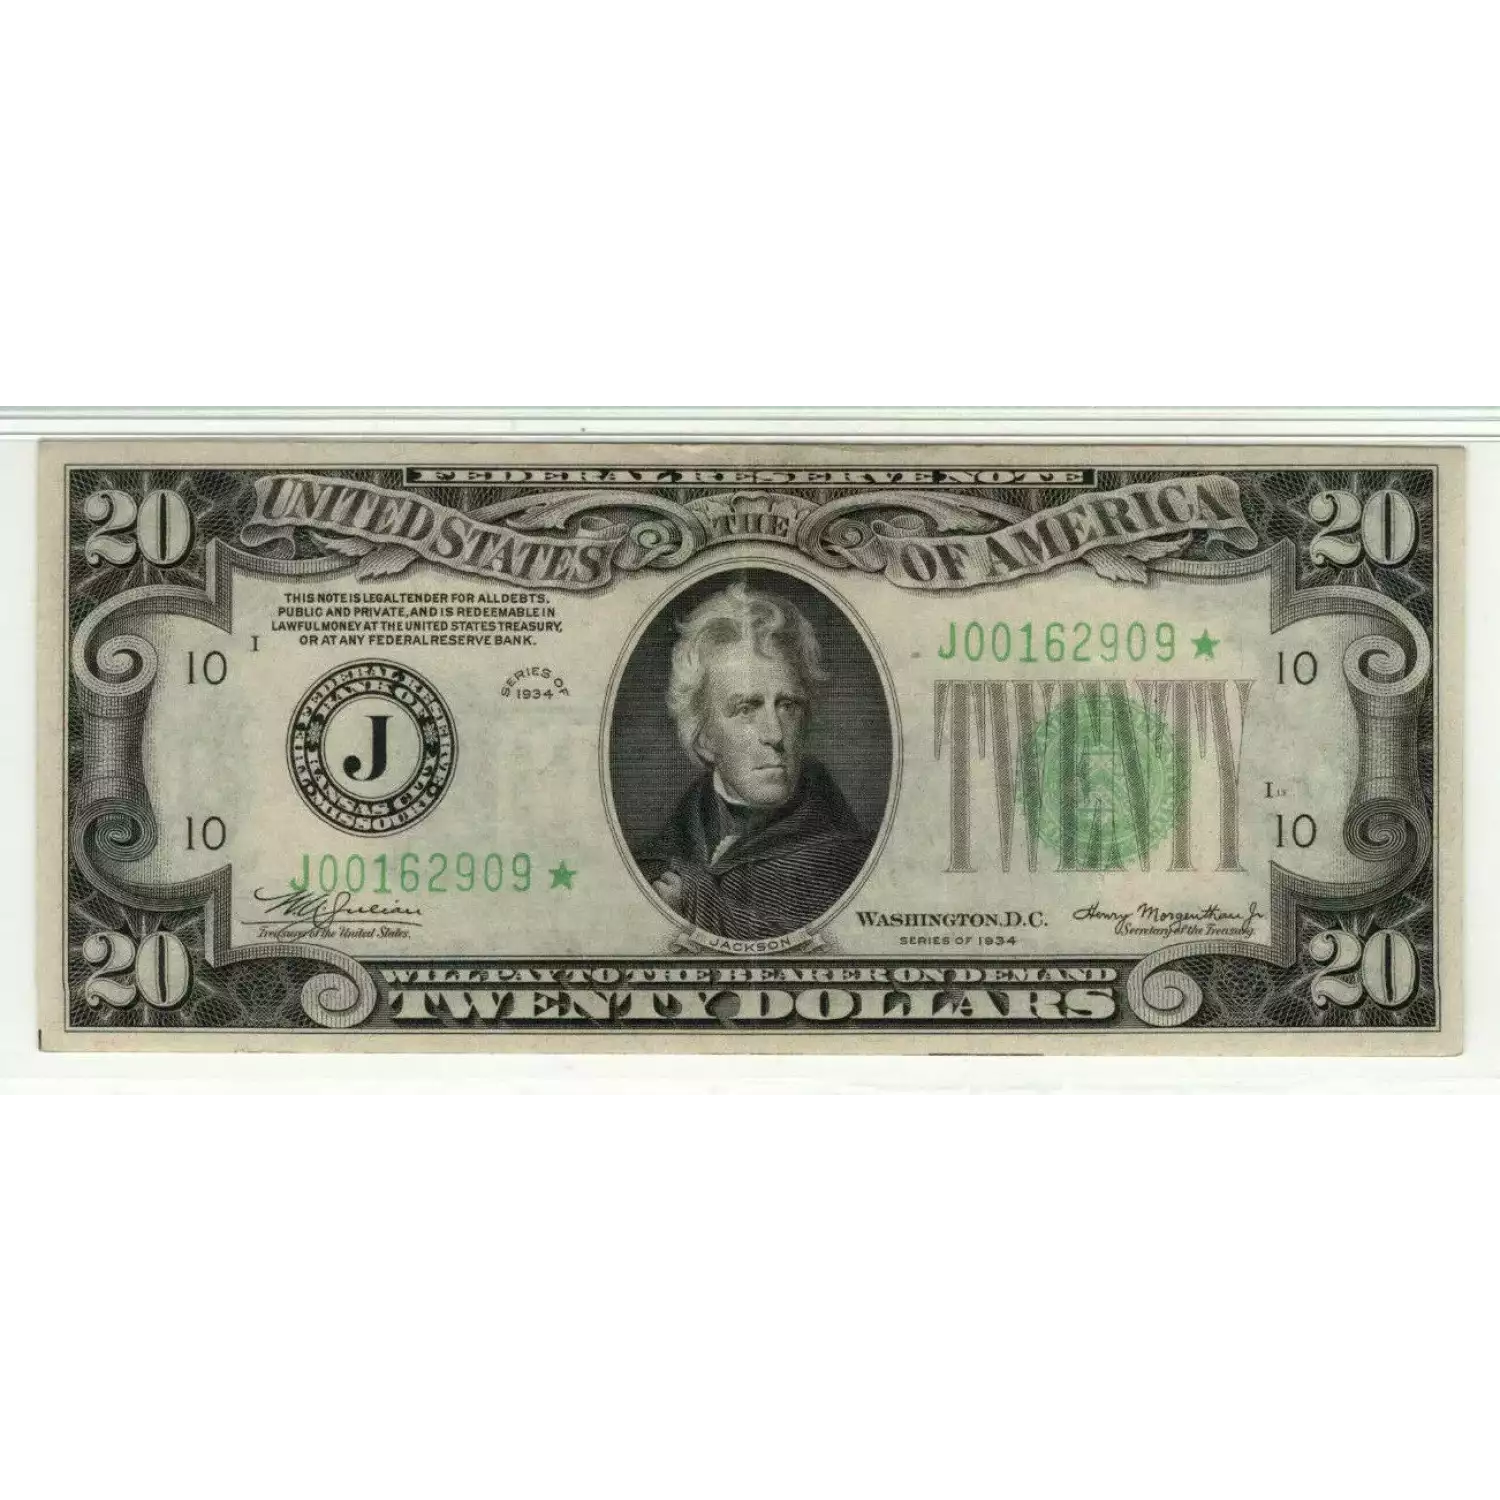 $20 1934 light Green seal. Small Size $20 Federal Reserve Notes 2054-J* (3)